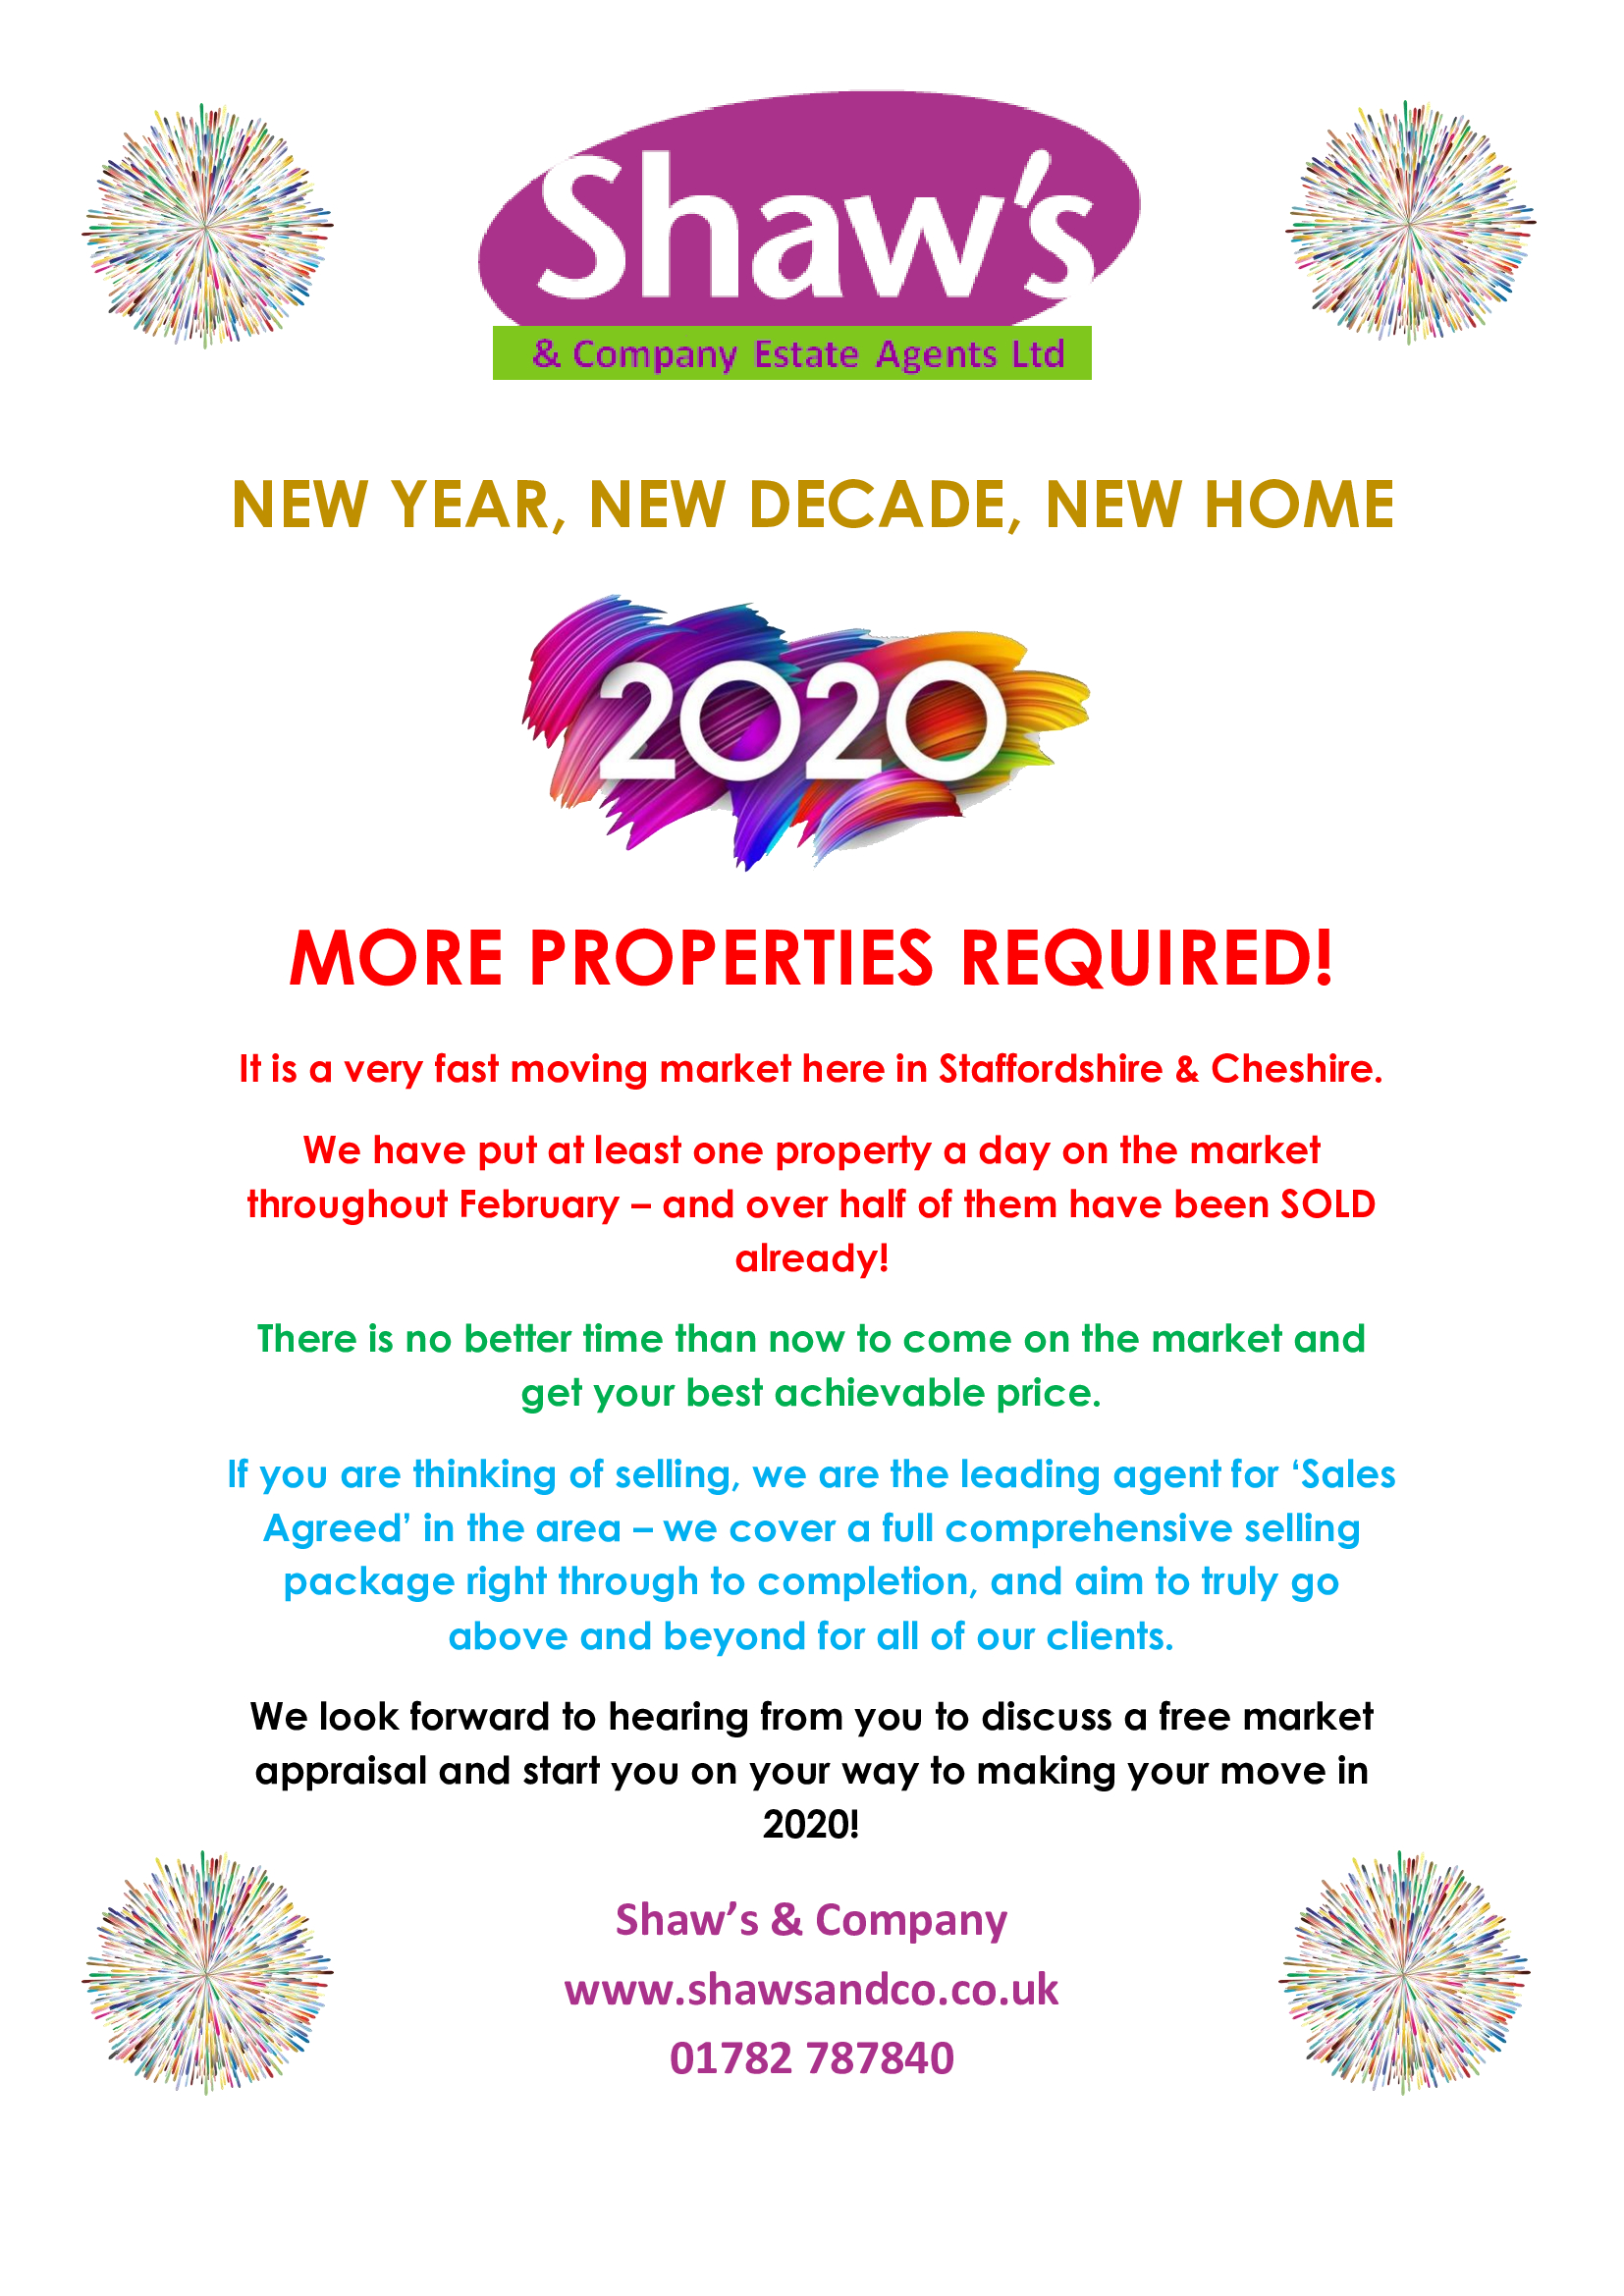 MORE PROPERTIES REQUIRED TO SELL!